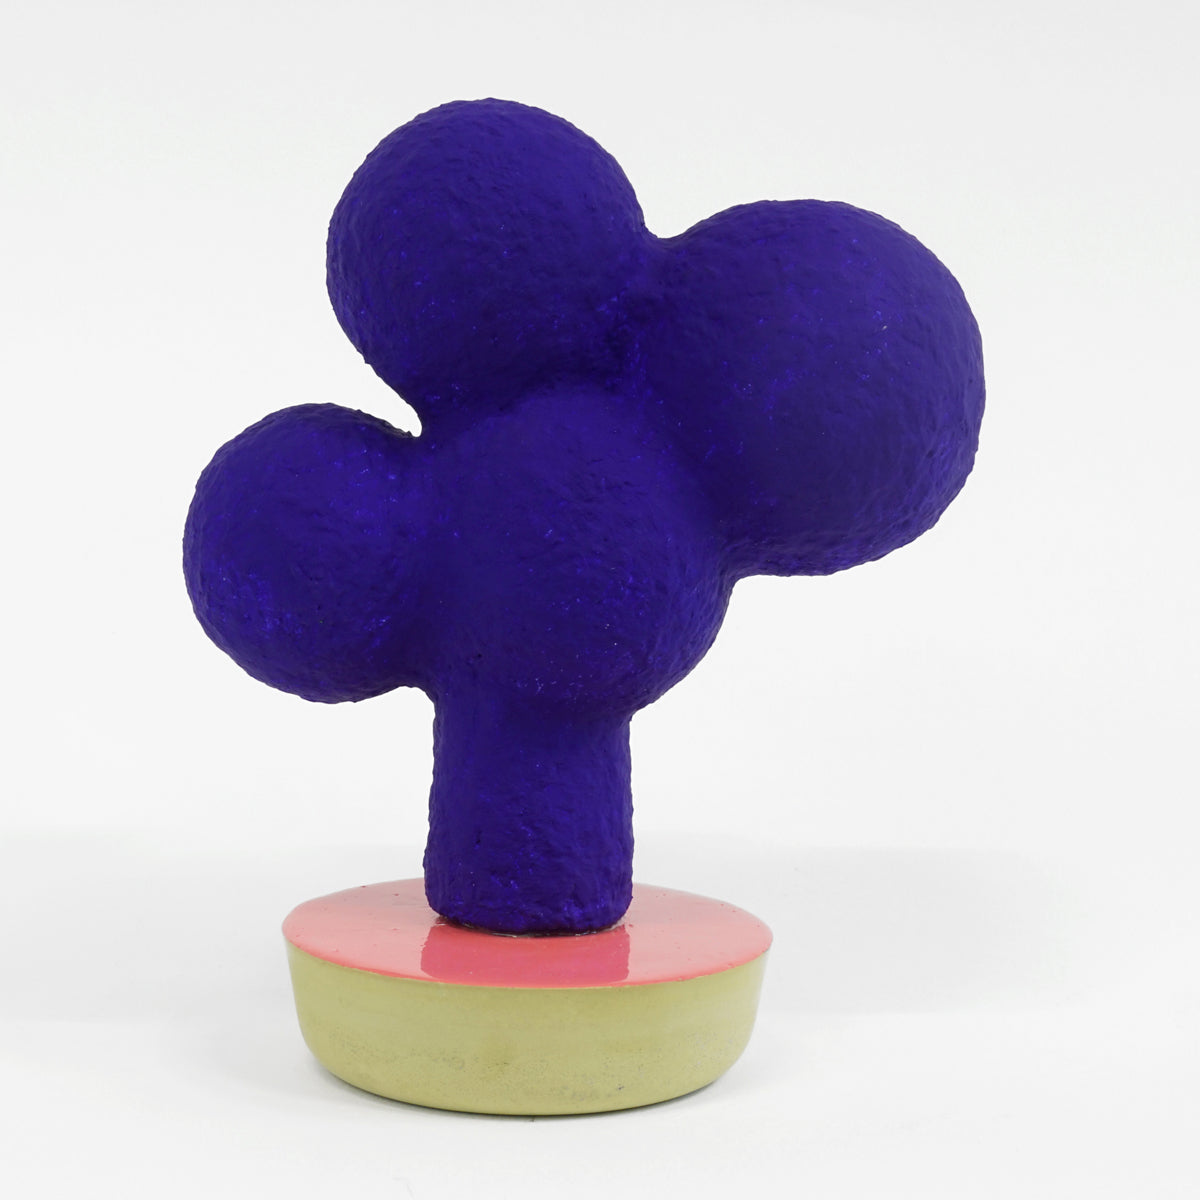 CHIAOZZA abstract biomorphic sculpture - purple on pink and yellow base